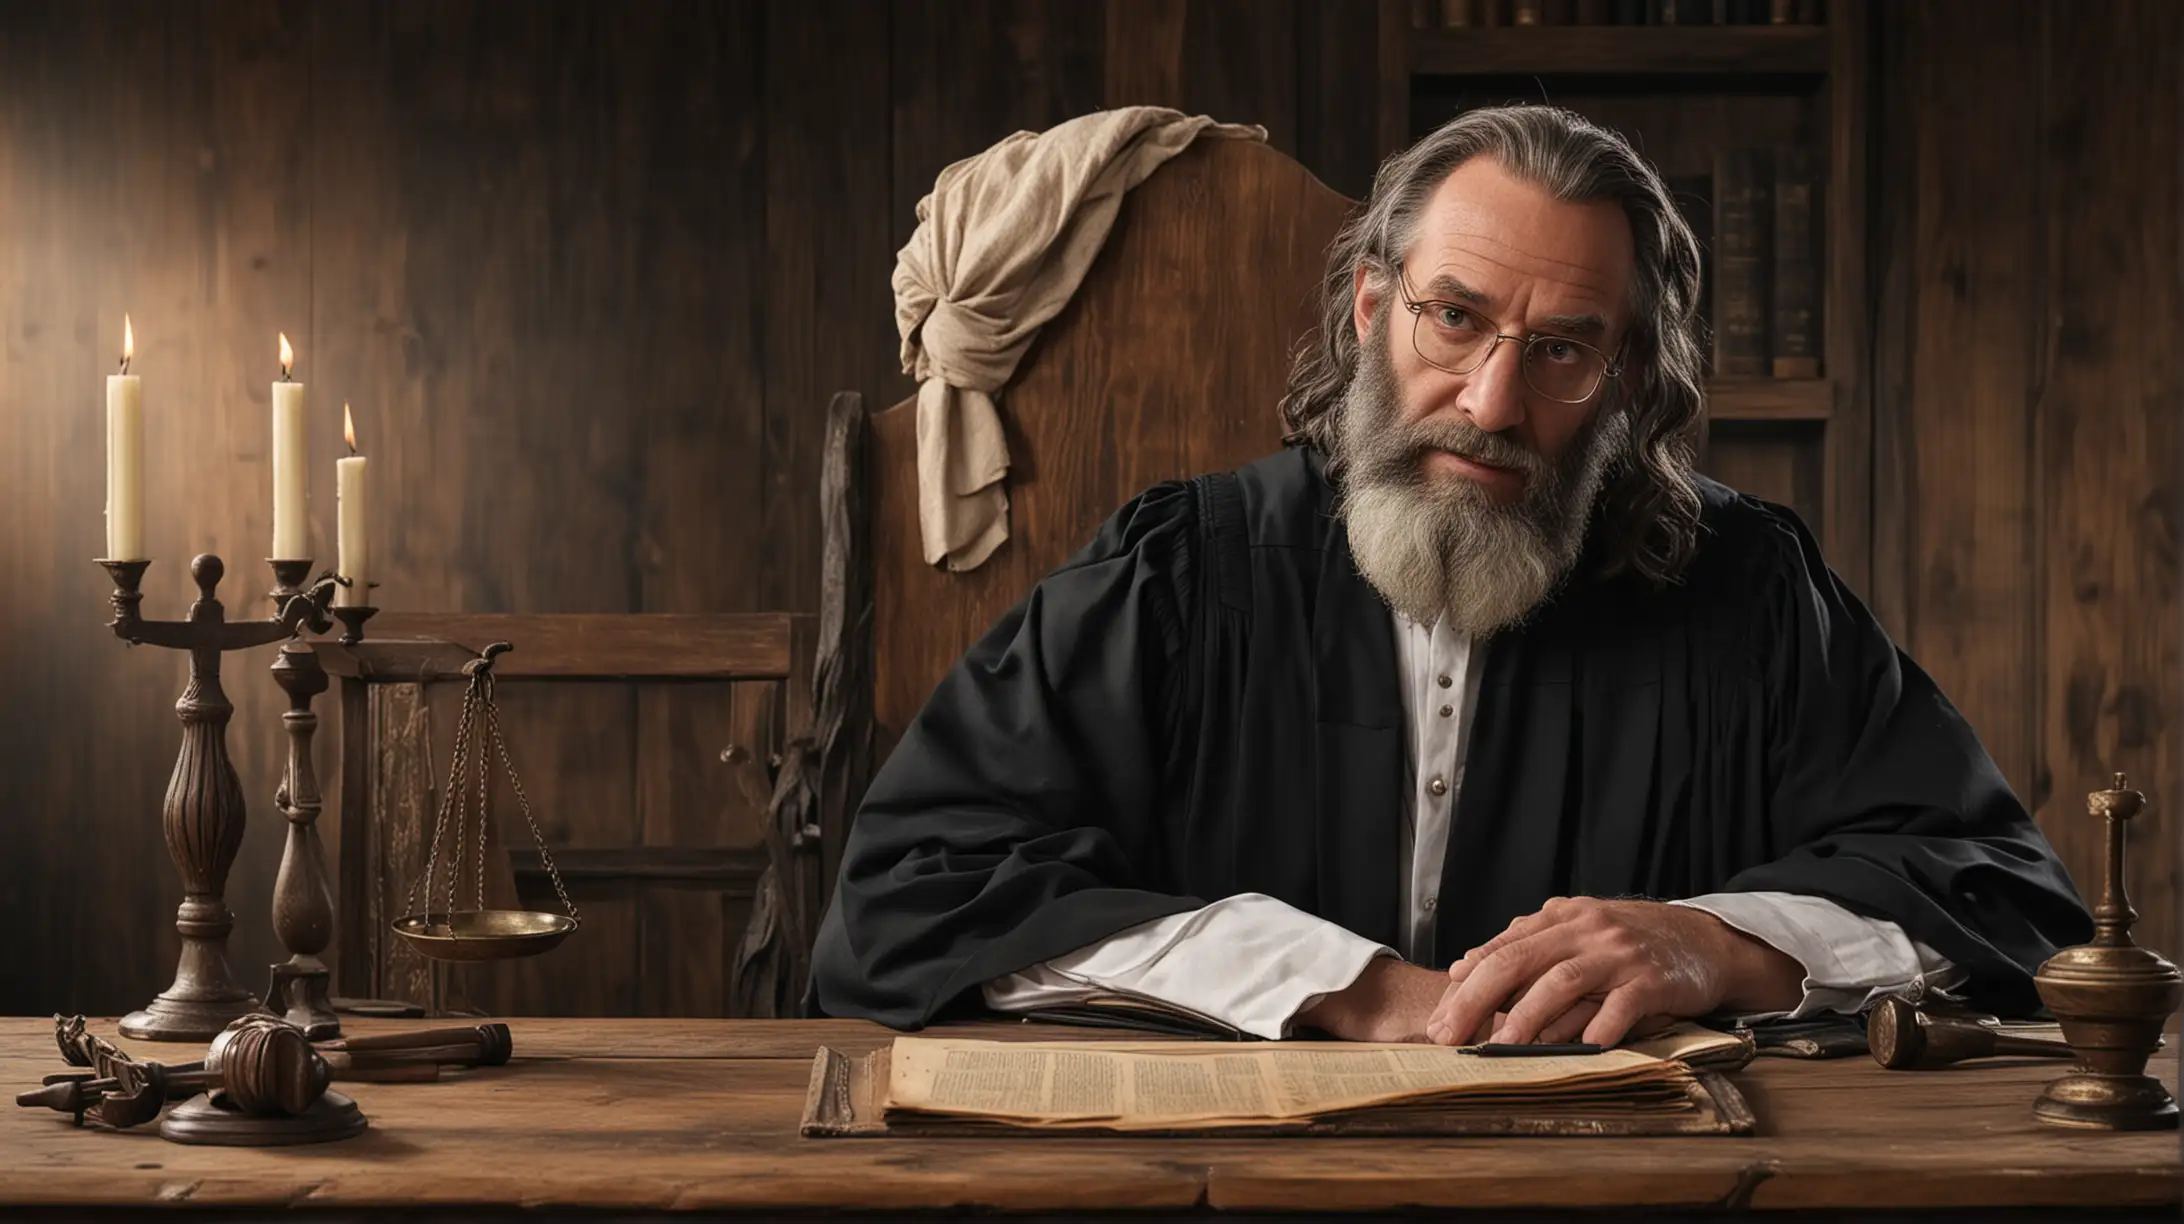 I need a thumbnail image, that shows a serious looking male judge at his old wooden desk.  Set during the era of the Biblical Moses.